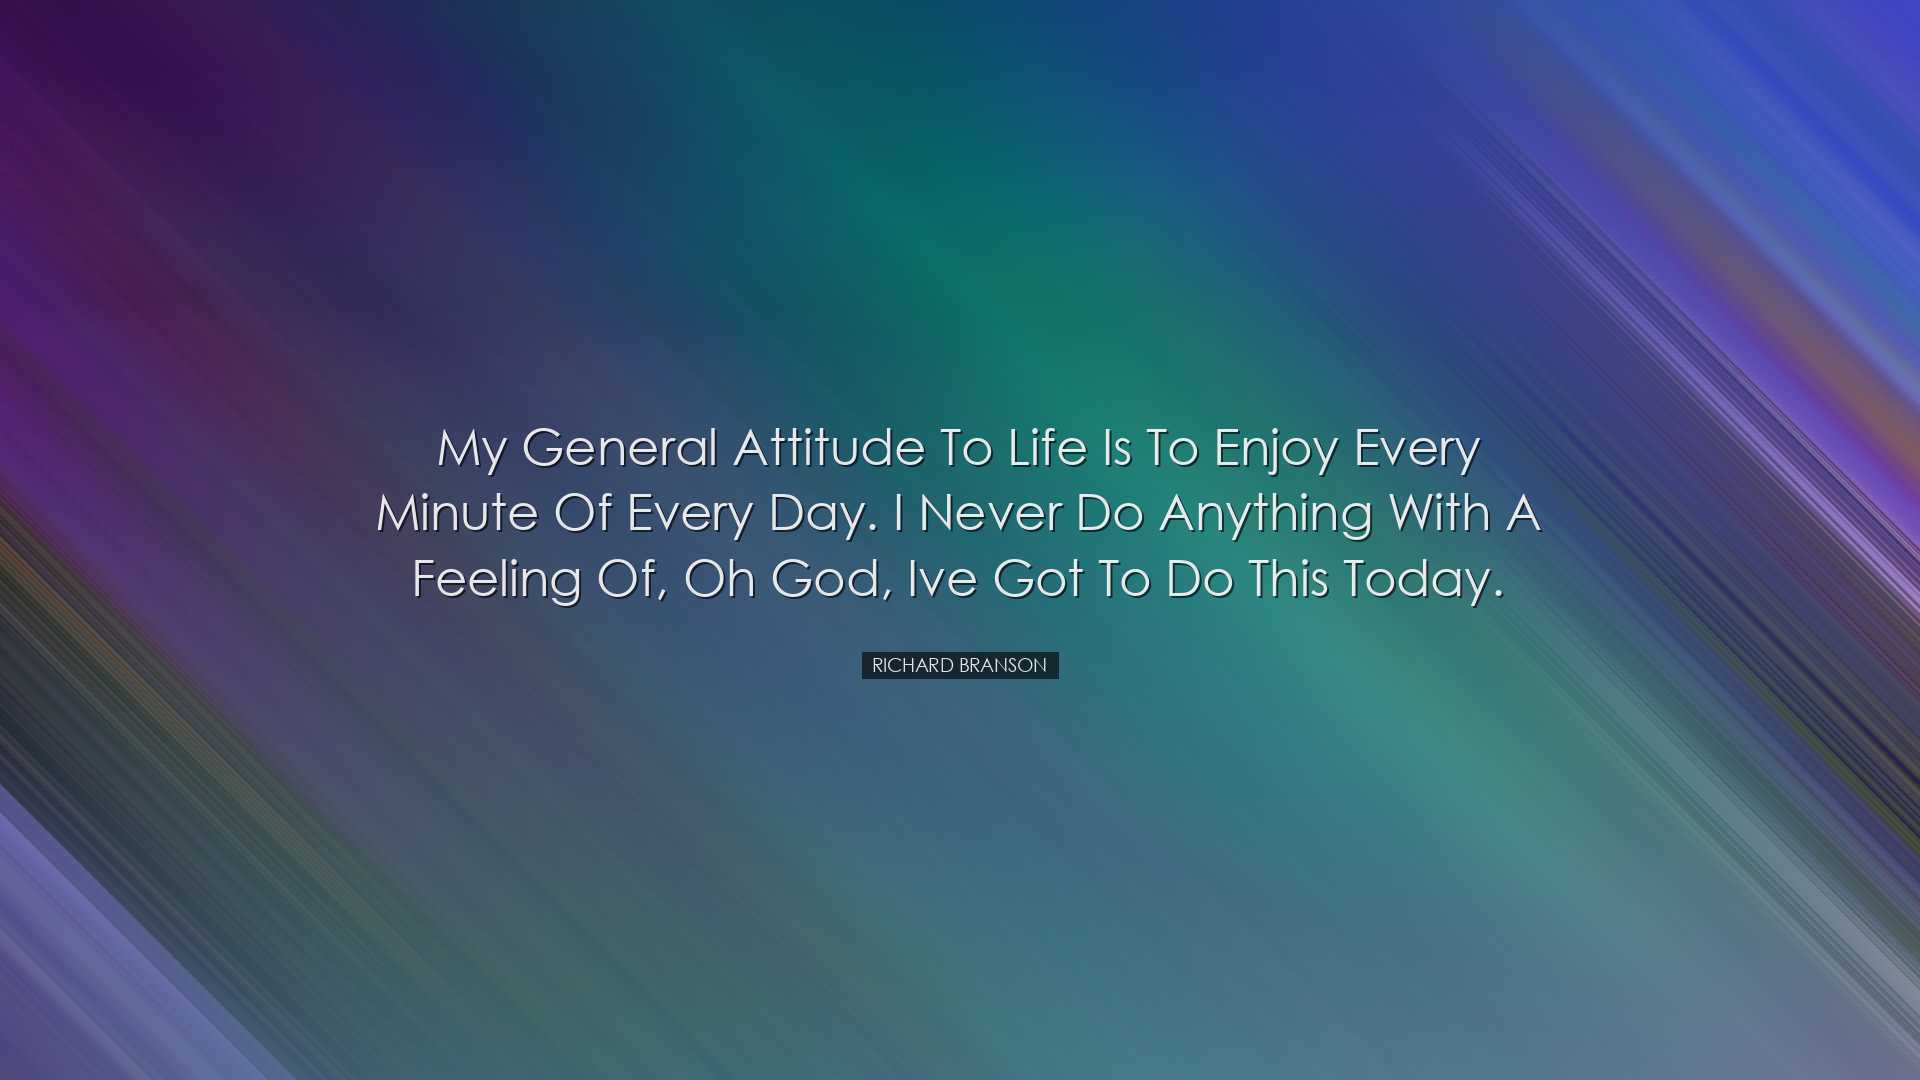 My general attitude to life is to enjoy every minute of every day.